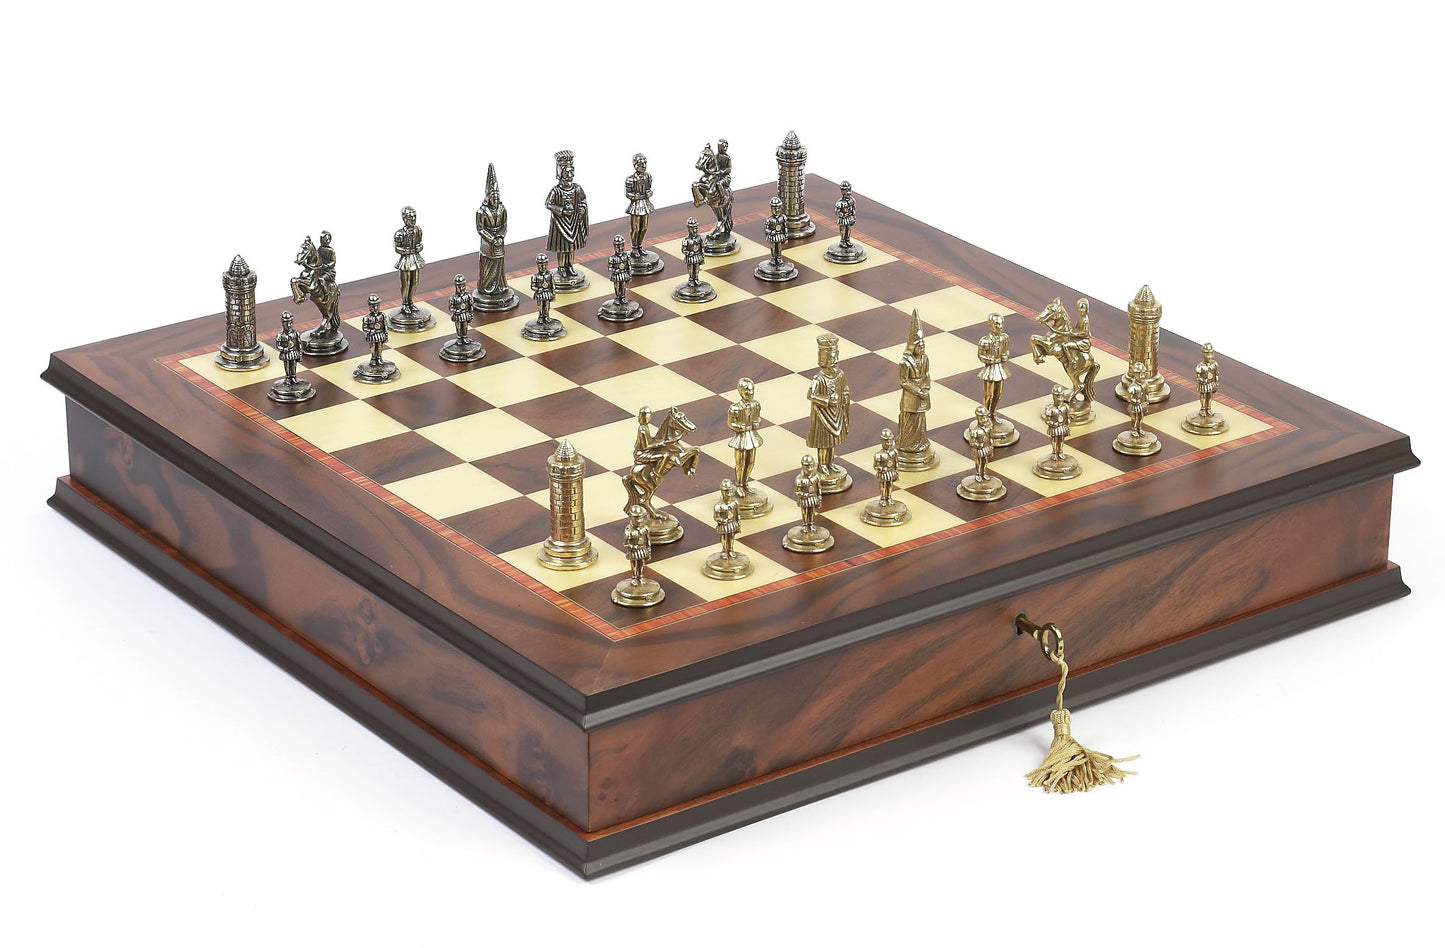 Brass Camelot Themed Chessmen & The Ultimate Board/Cabinet Chess Set